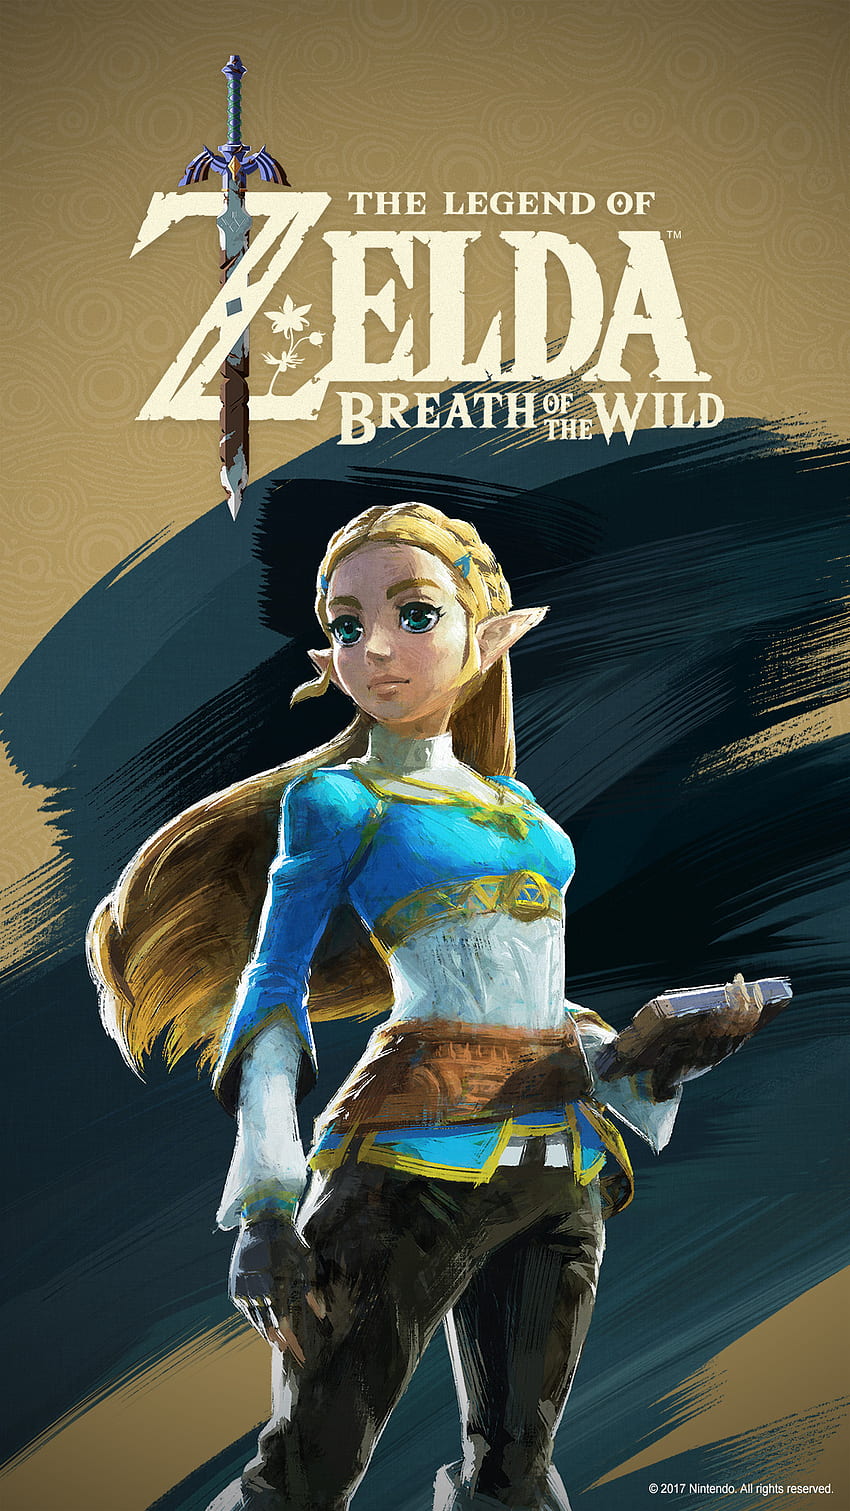 The Legend of Zelda™: Breath of the Wild for the Nintendo Switch™ home gaming system and Wii U™ console, Legend of Zelda 1080X1920 HD phone wallpaper